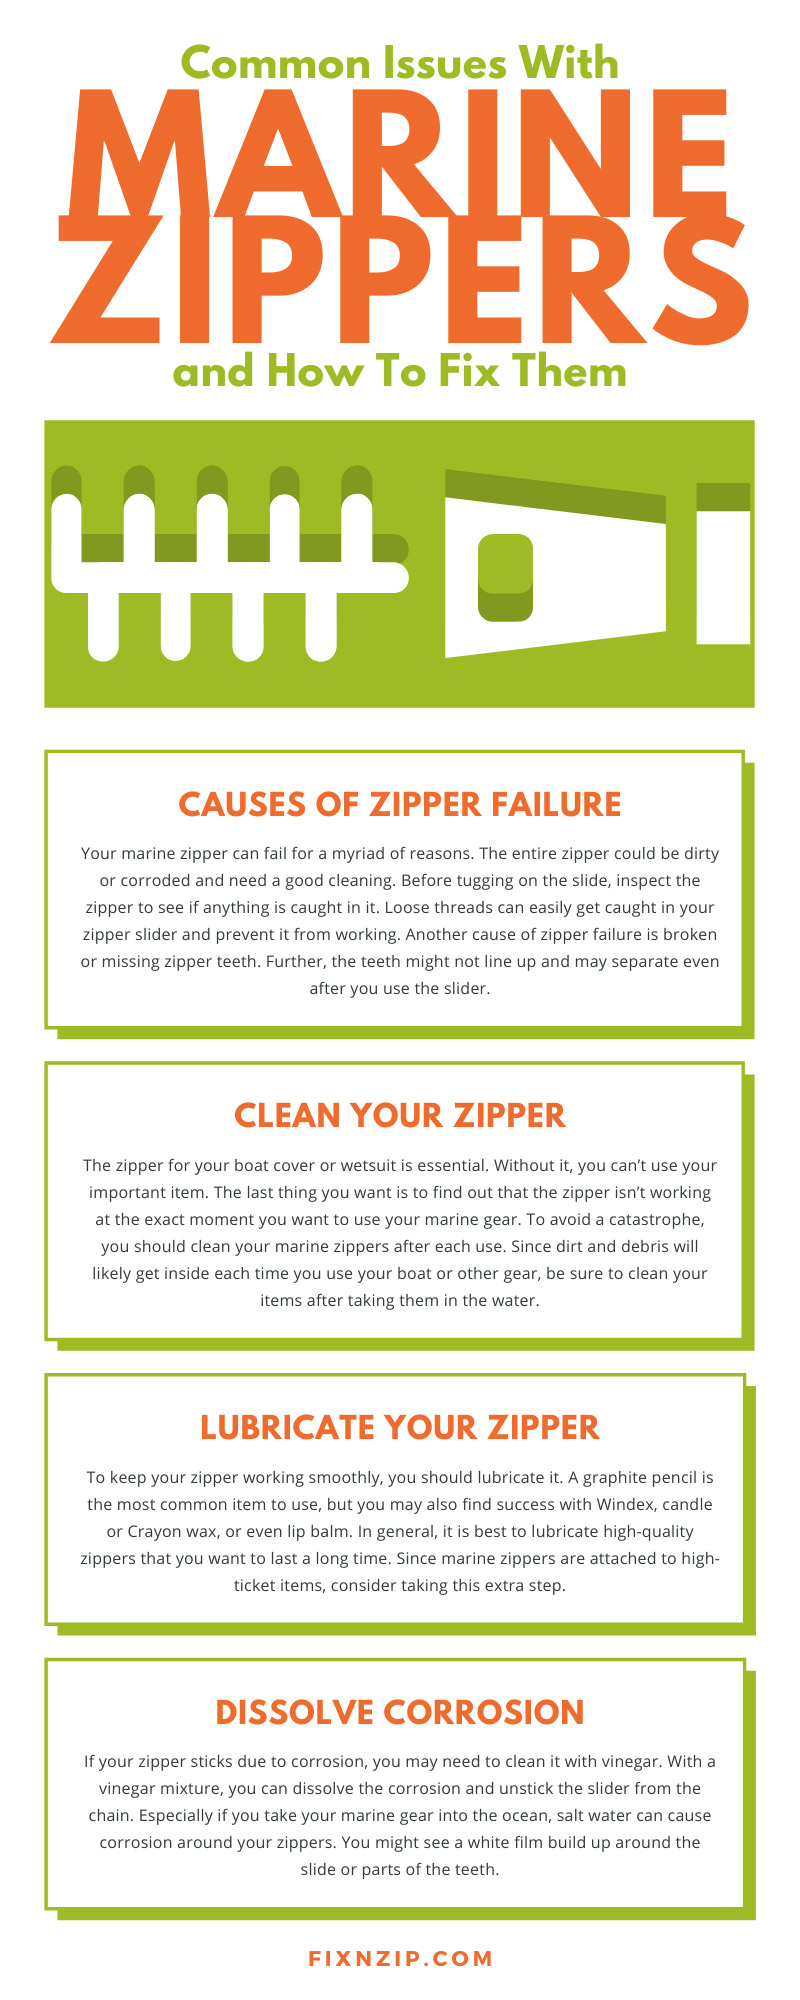 Common Issues With Marine Zippers and How To Fix Them
